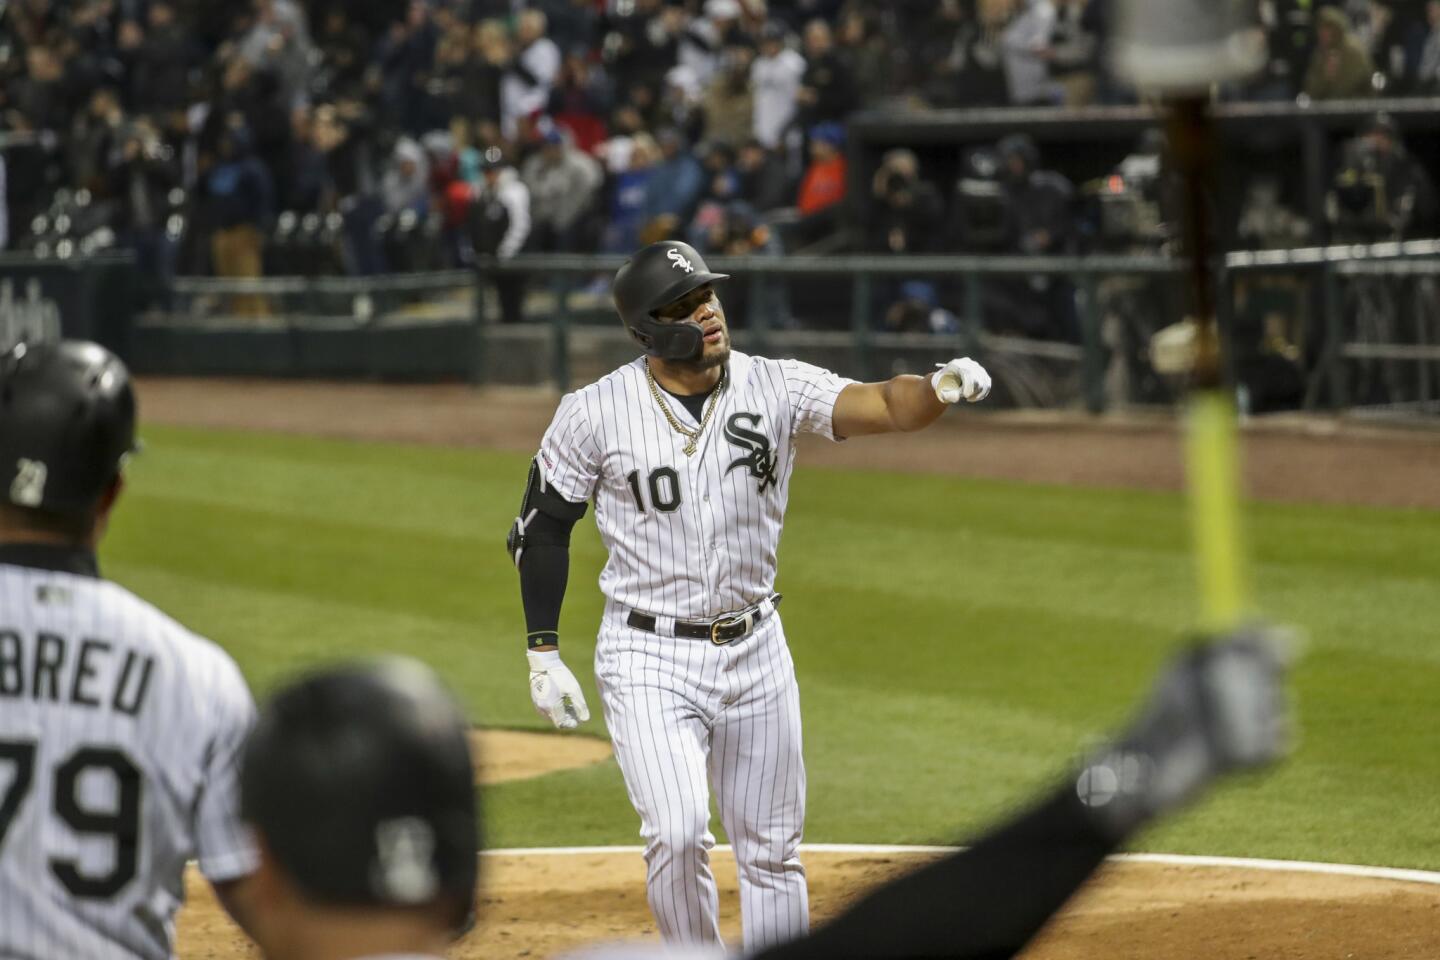 White Sox third baseman Yoan Moncada looks up while crossing home plate after hitting a solo homer during the fifth inning against the Royals on April 16, 2019, at Guaranteed Rate Field.